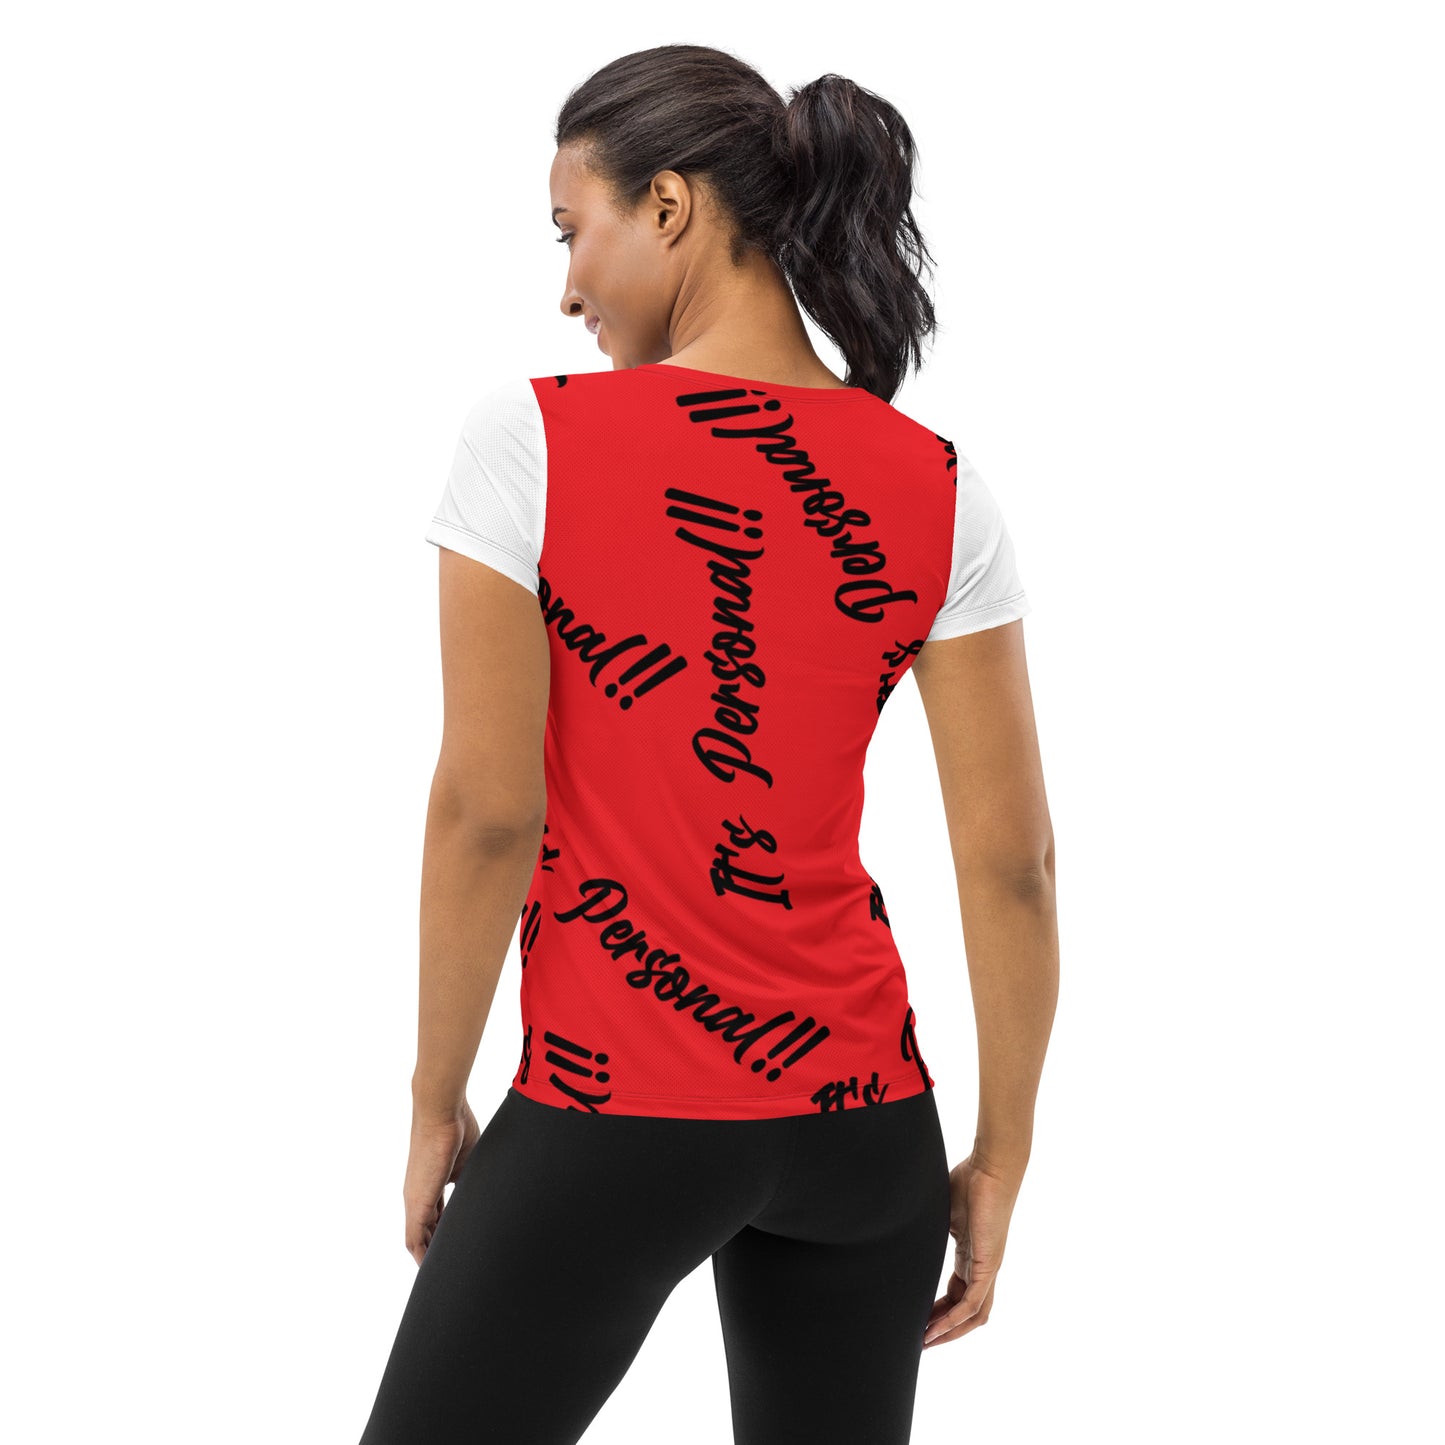 It's Personal - Red/White Sleeves [All-Over Print Women's Athletic T-shirt]